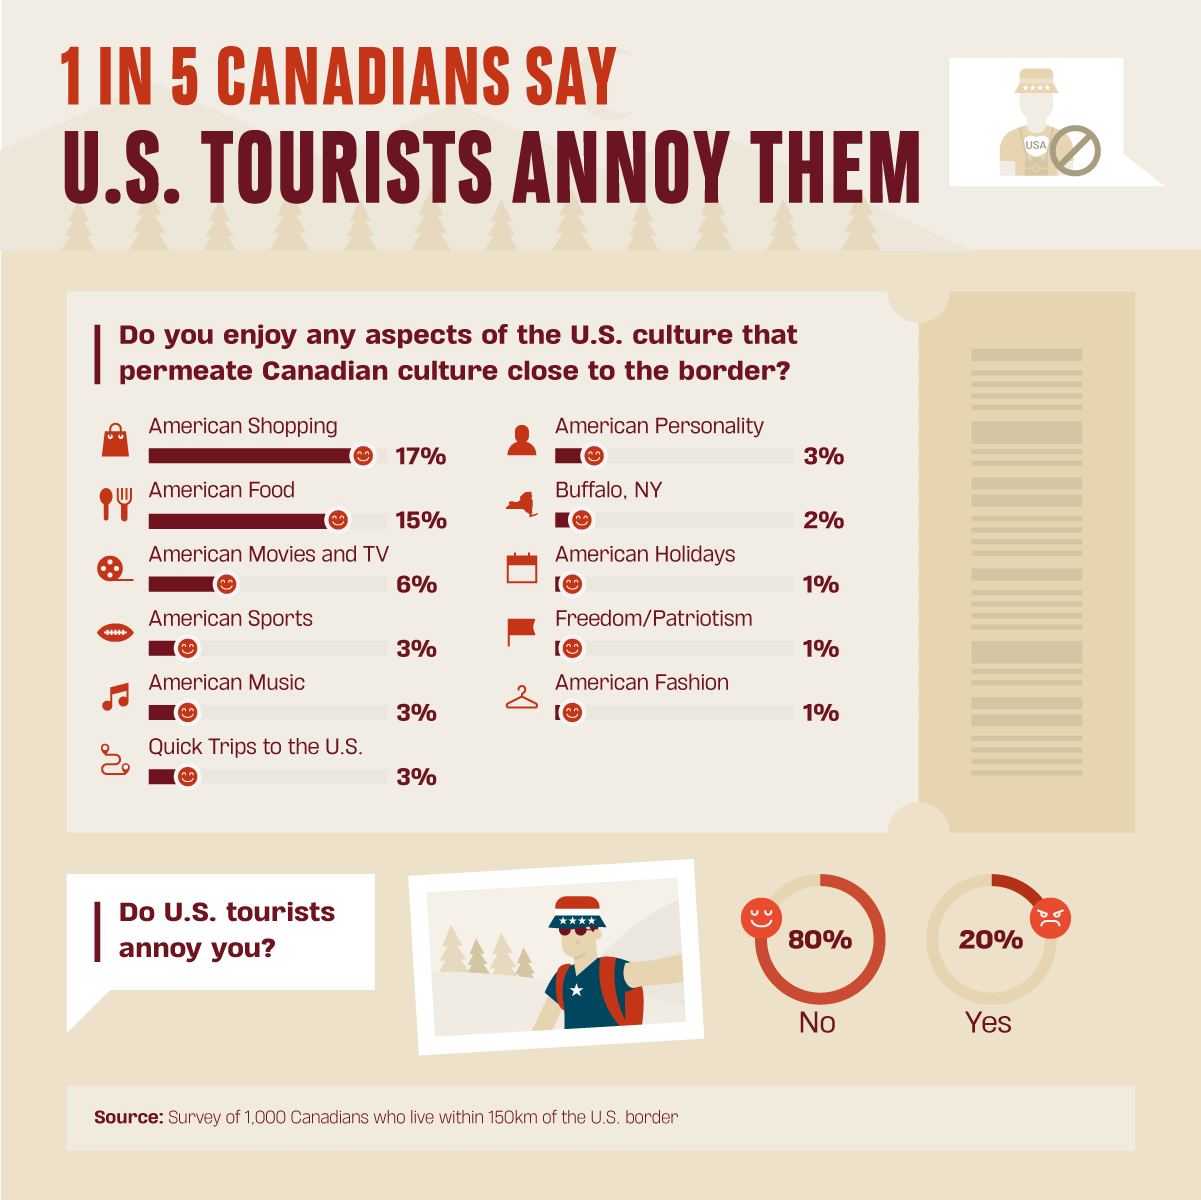 1 in 5 Canadians say U.S. tourists annoy them